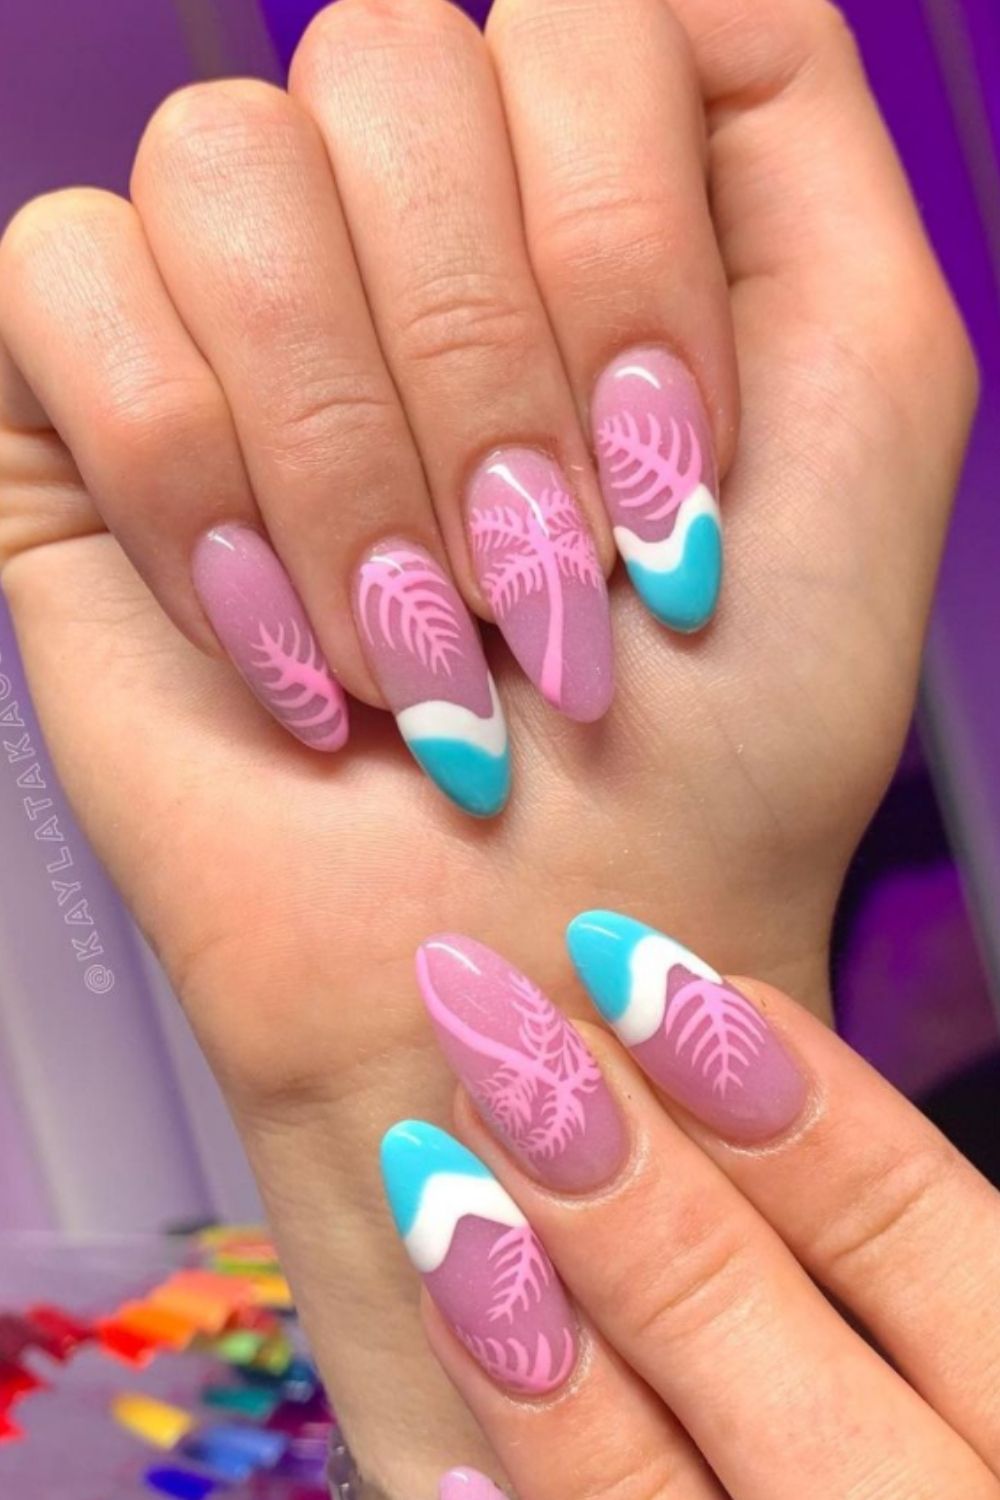 Pink and white,and light blue almond nails designs for beach nails ideas